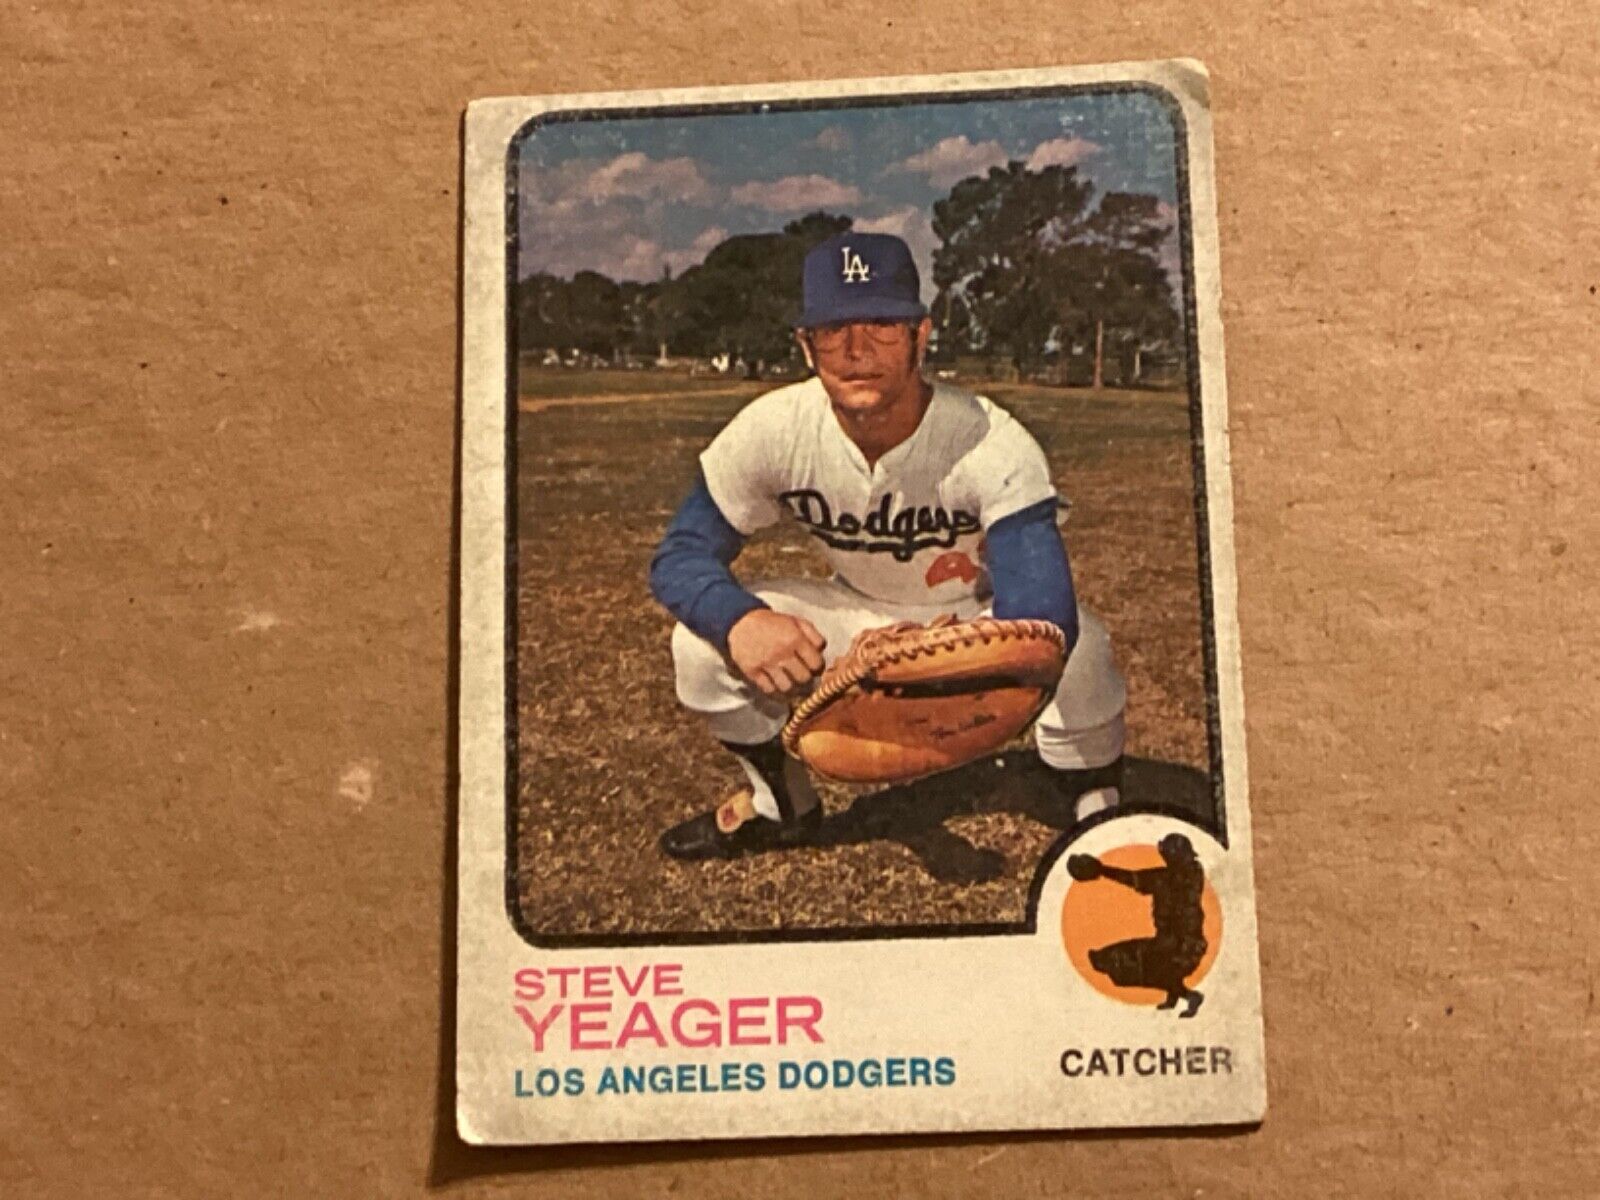 1973 Topps Baseball Card #59 STEVE YEAGER Rookie Los Angeles Dodgers - NM - . rookie card picture